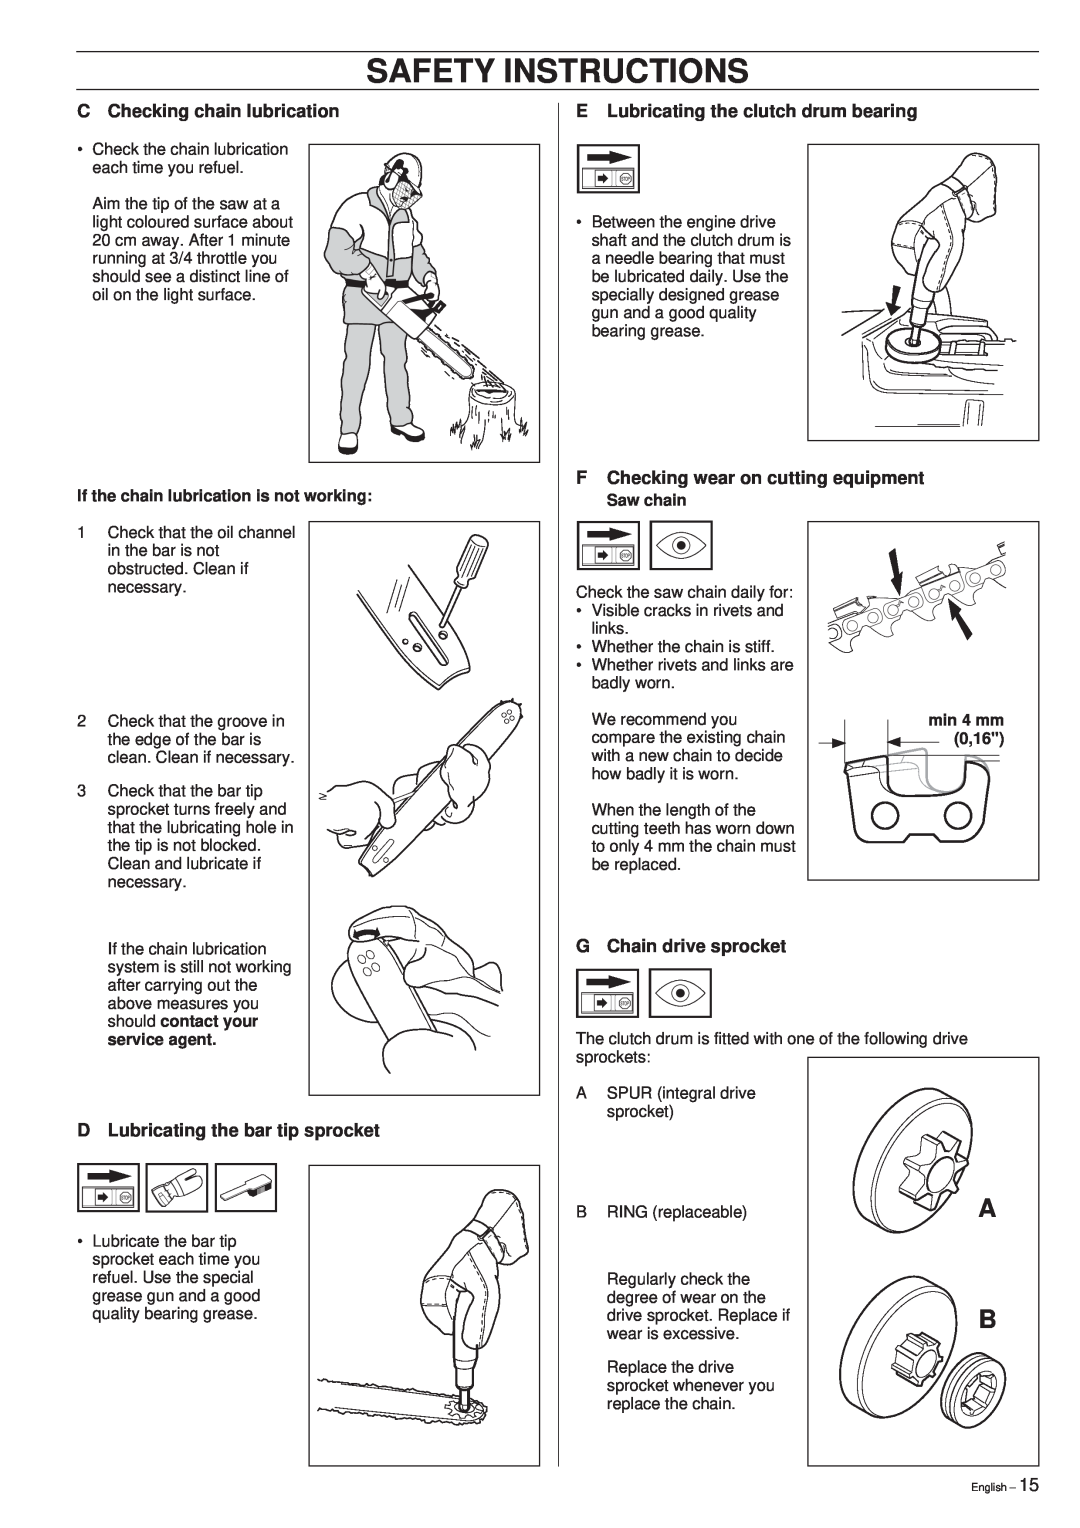 Husqvarna 394XP manual Safety Instructions, C Checking chain lubrication, E Lubricating the clutch drum bearing 